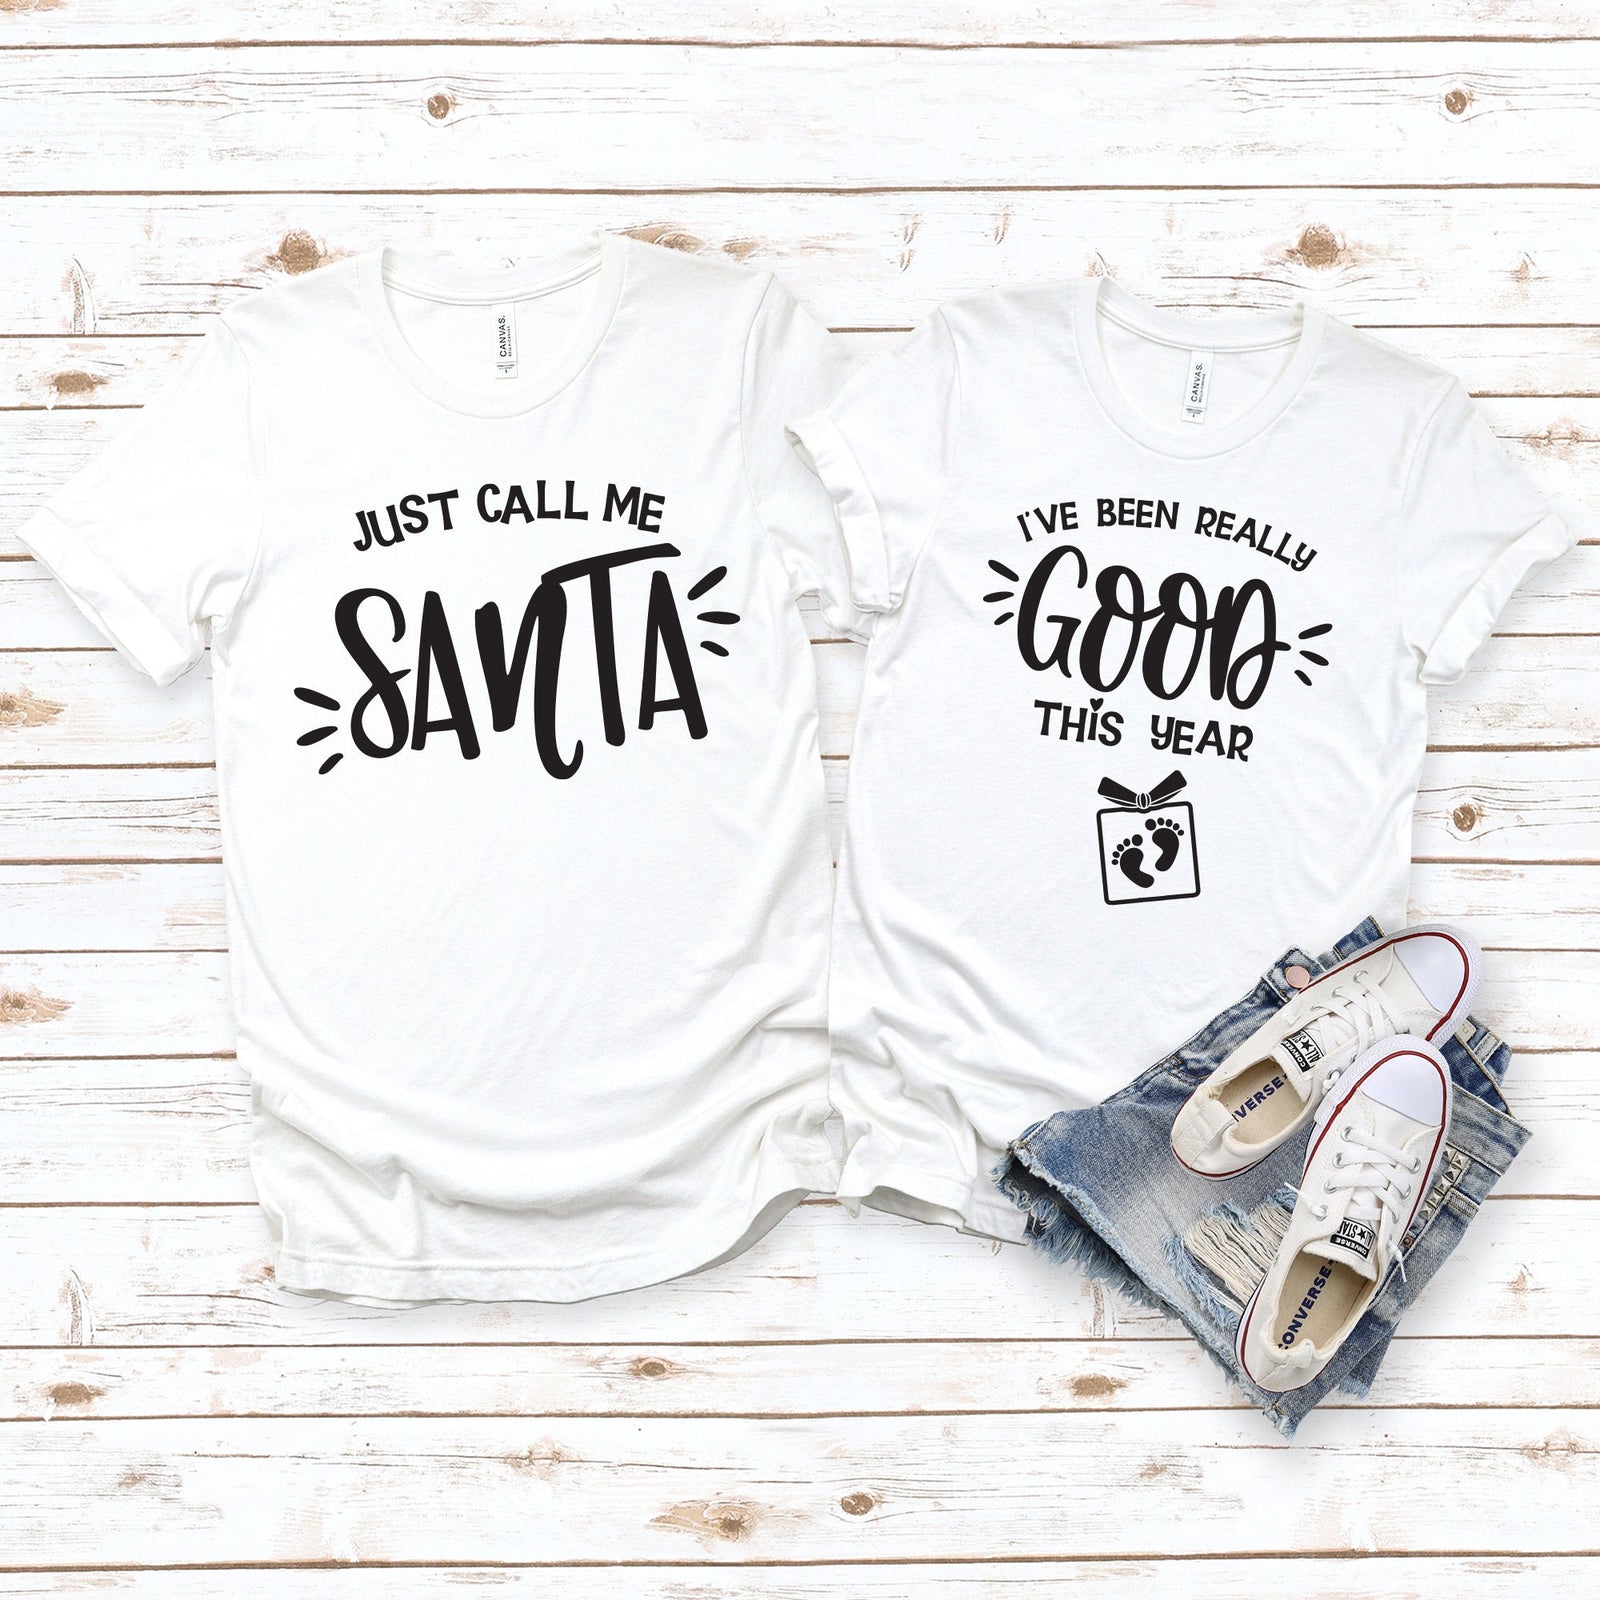 Pregnancy Announcement Christmas Couple Shirts -I've Been Really Good This Year - Just Call Me Santa - Christmas Baby Reveal - Holiday Humor